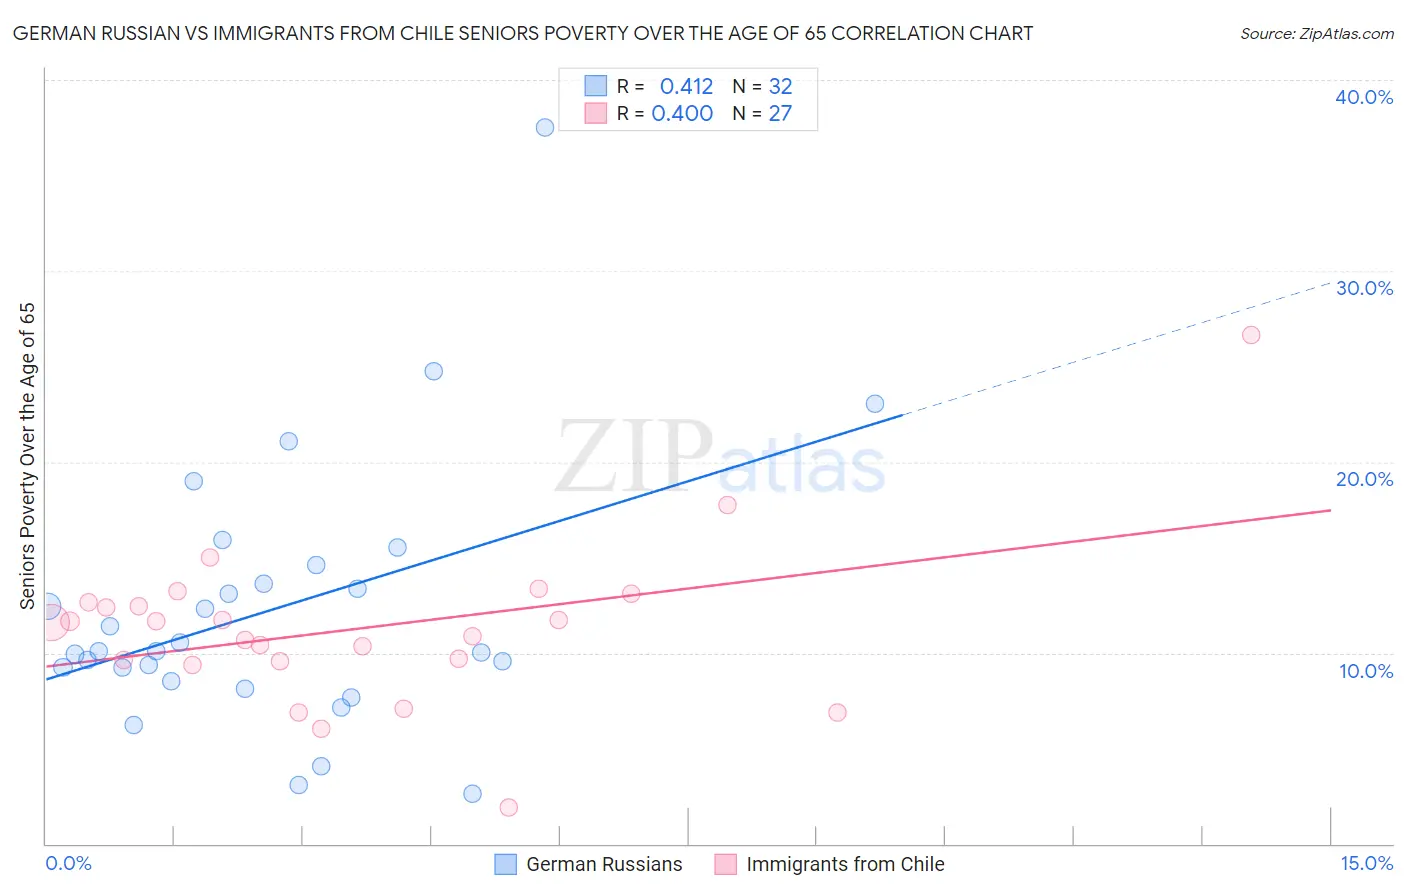 German Russian vs Immigrants from Chile Seniors Poverty Over the Age of 65